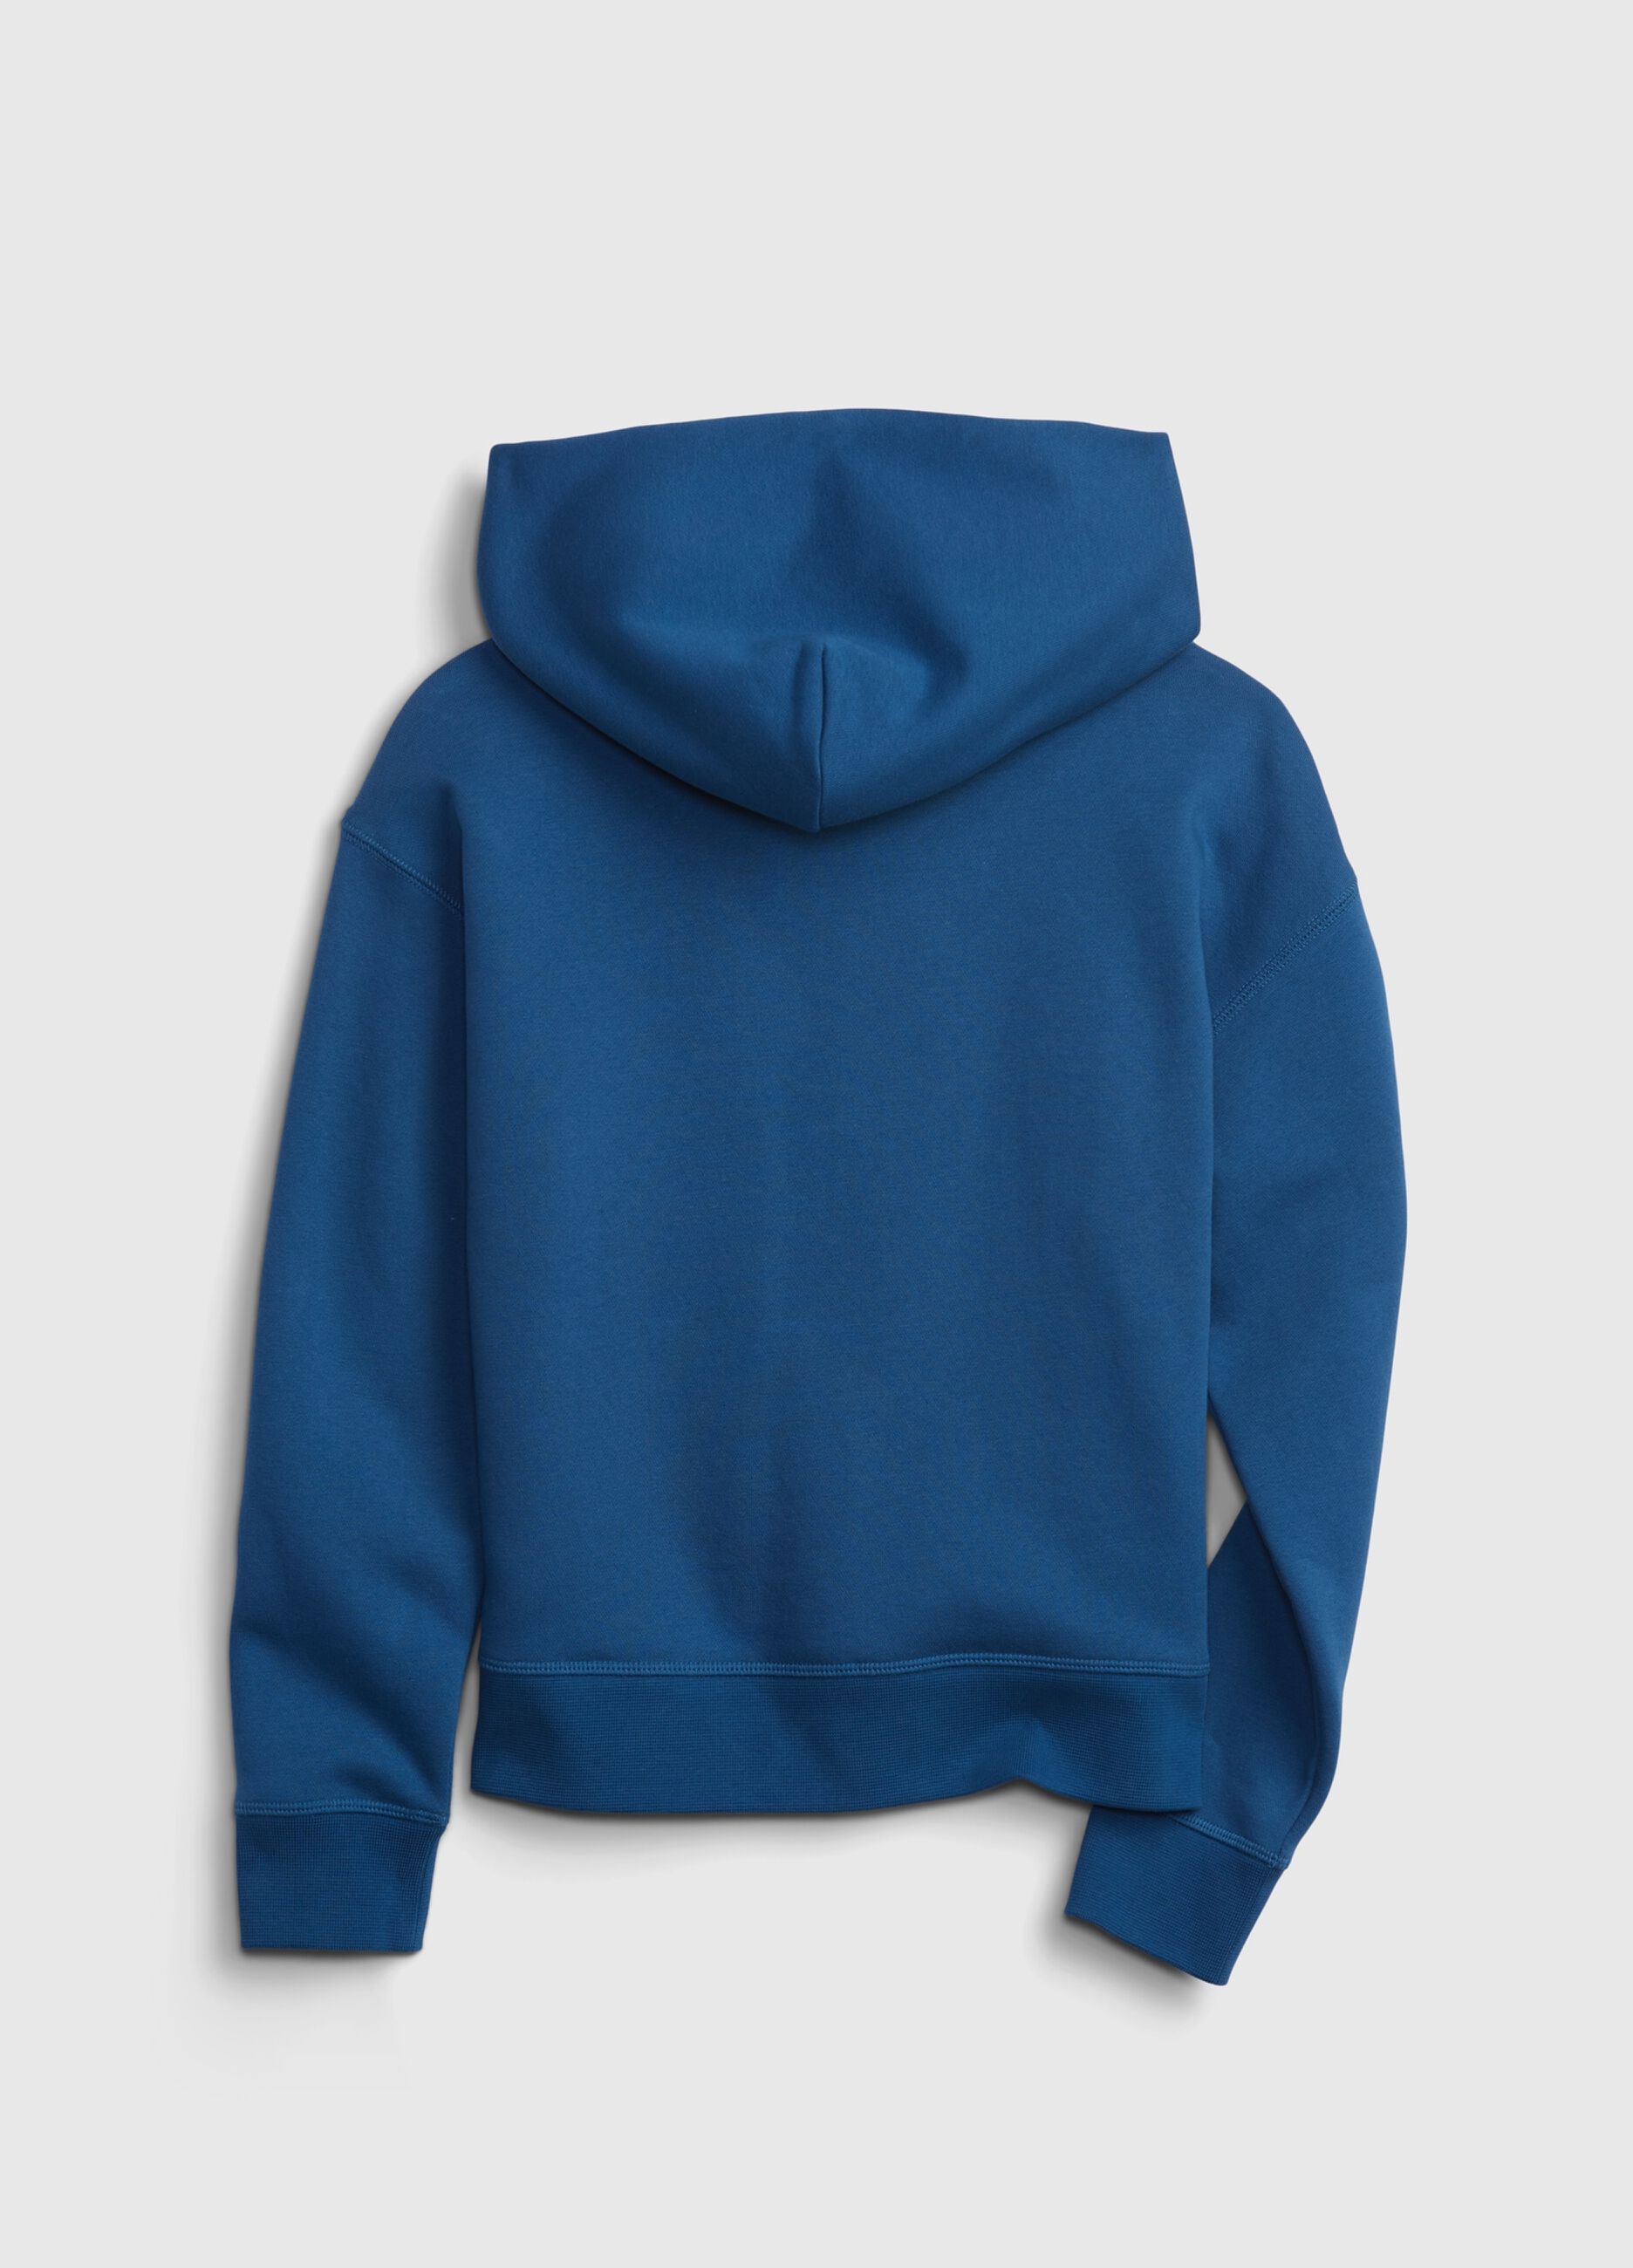 Oversize hoodie with Superman logo